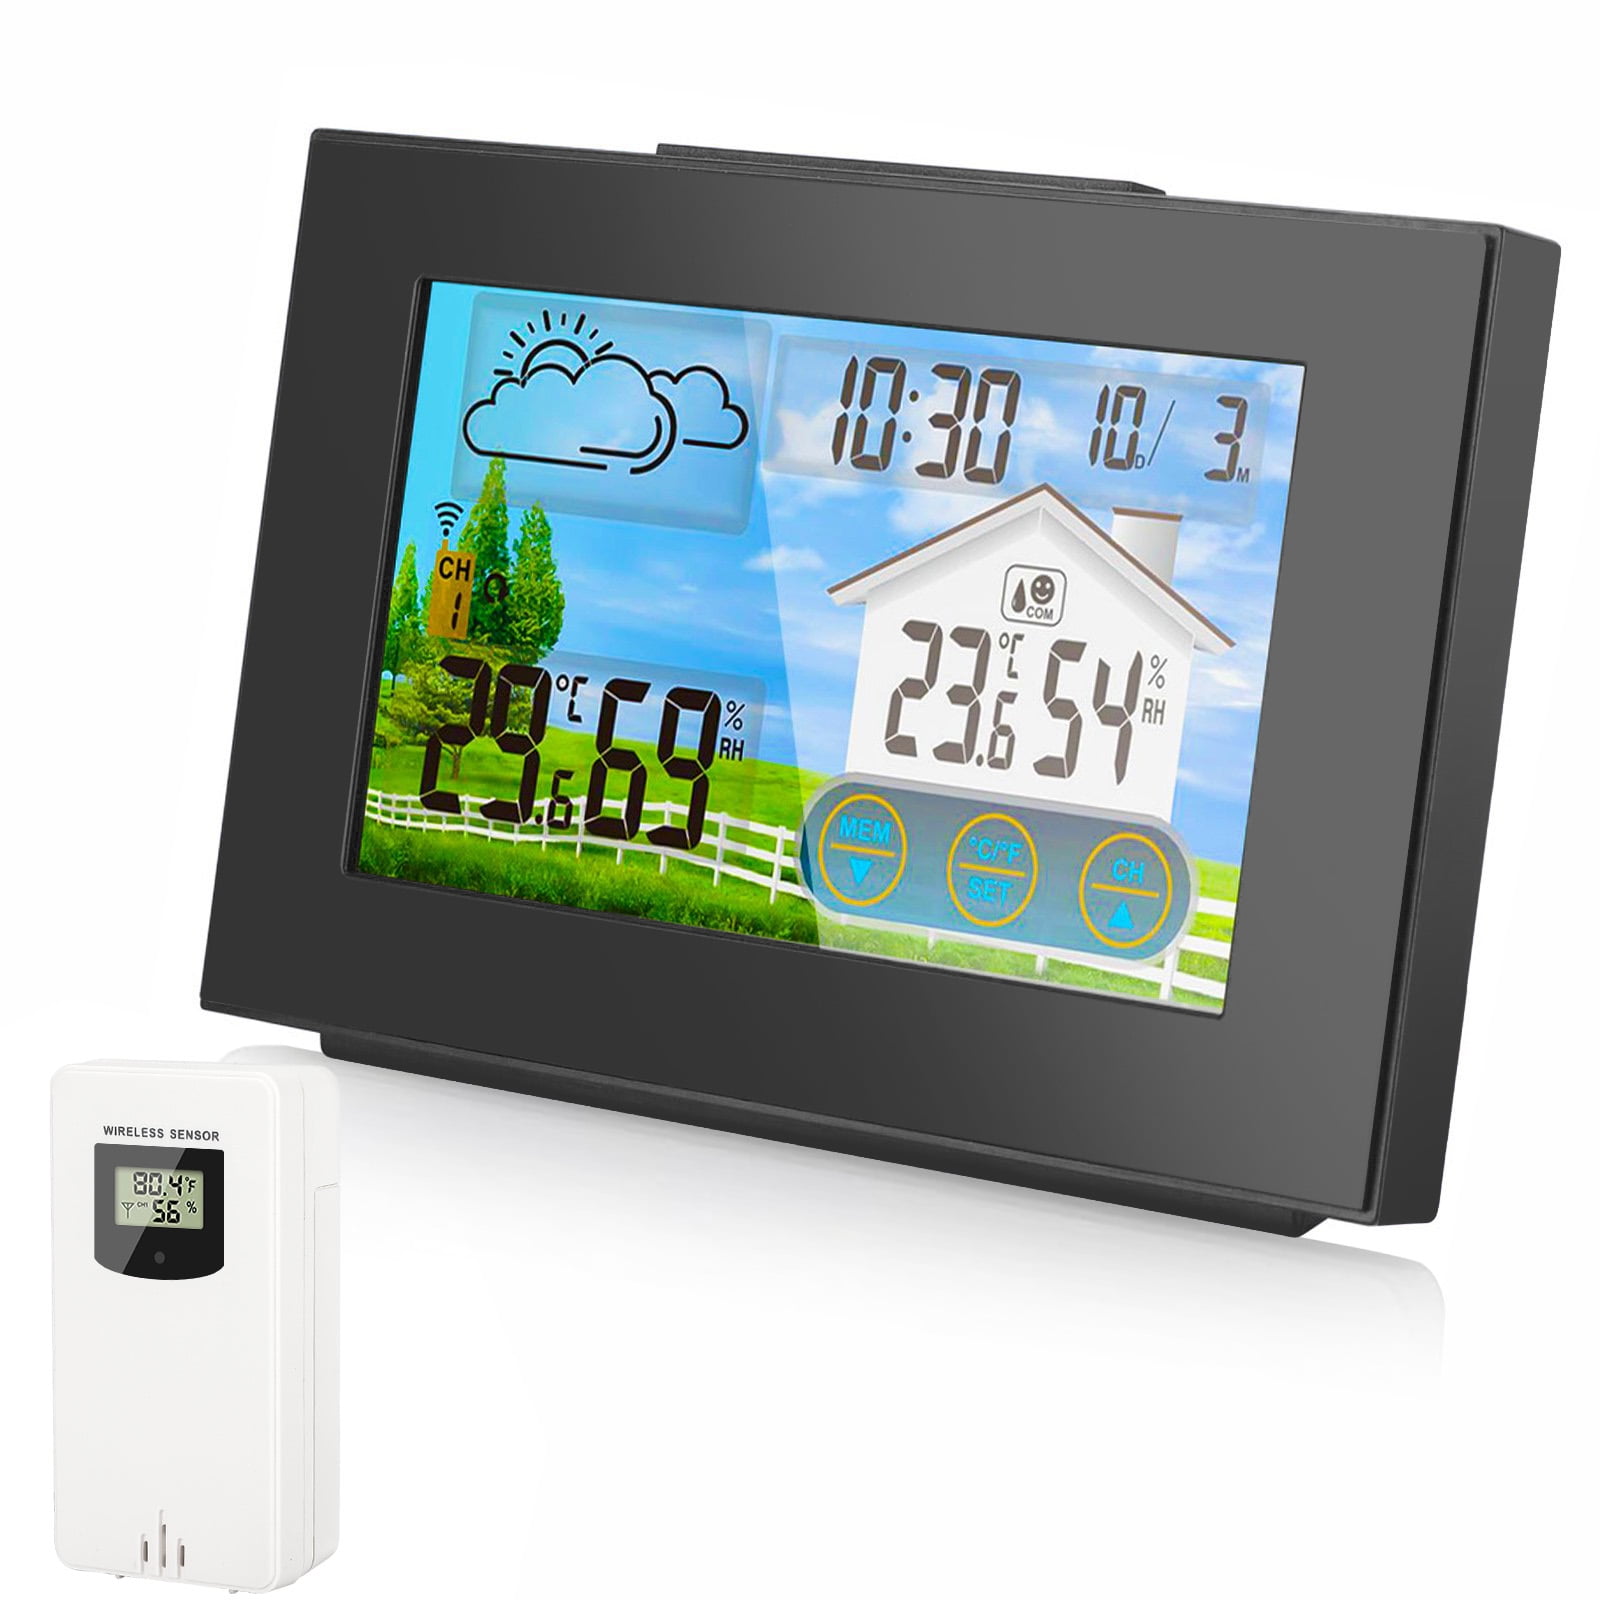 Digital LCD Color Display Wireless Weather Station Thermometer Humidity Monitor 